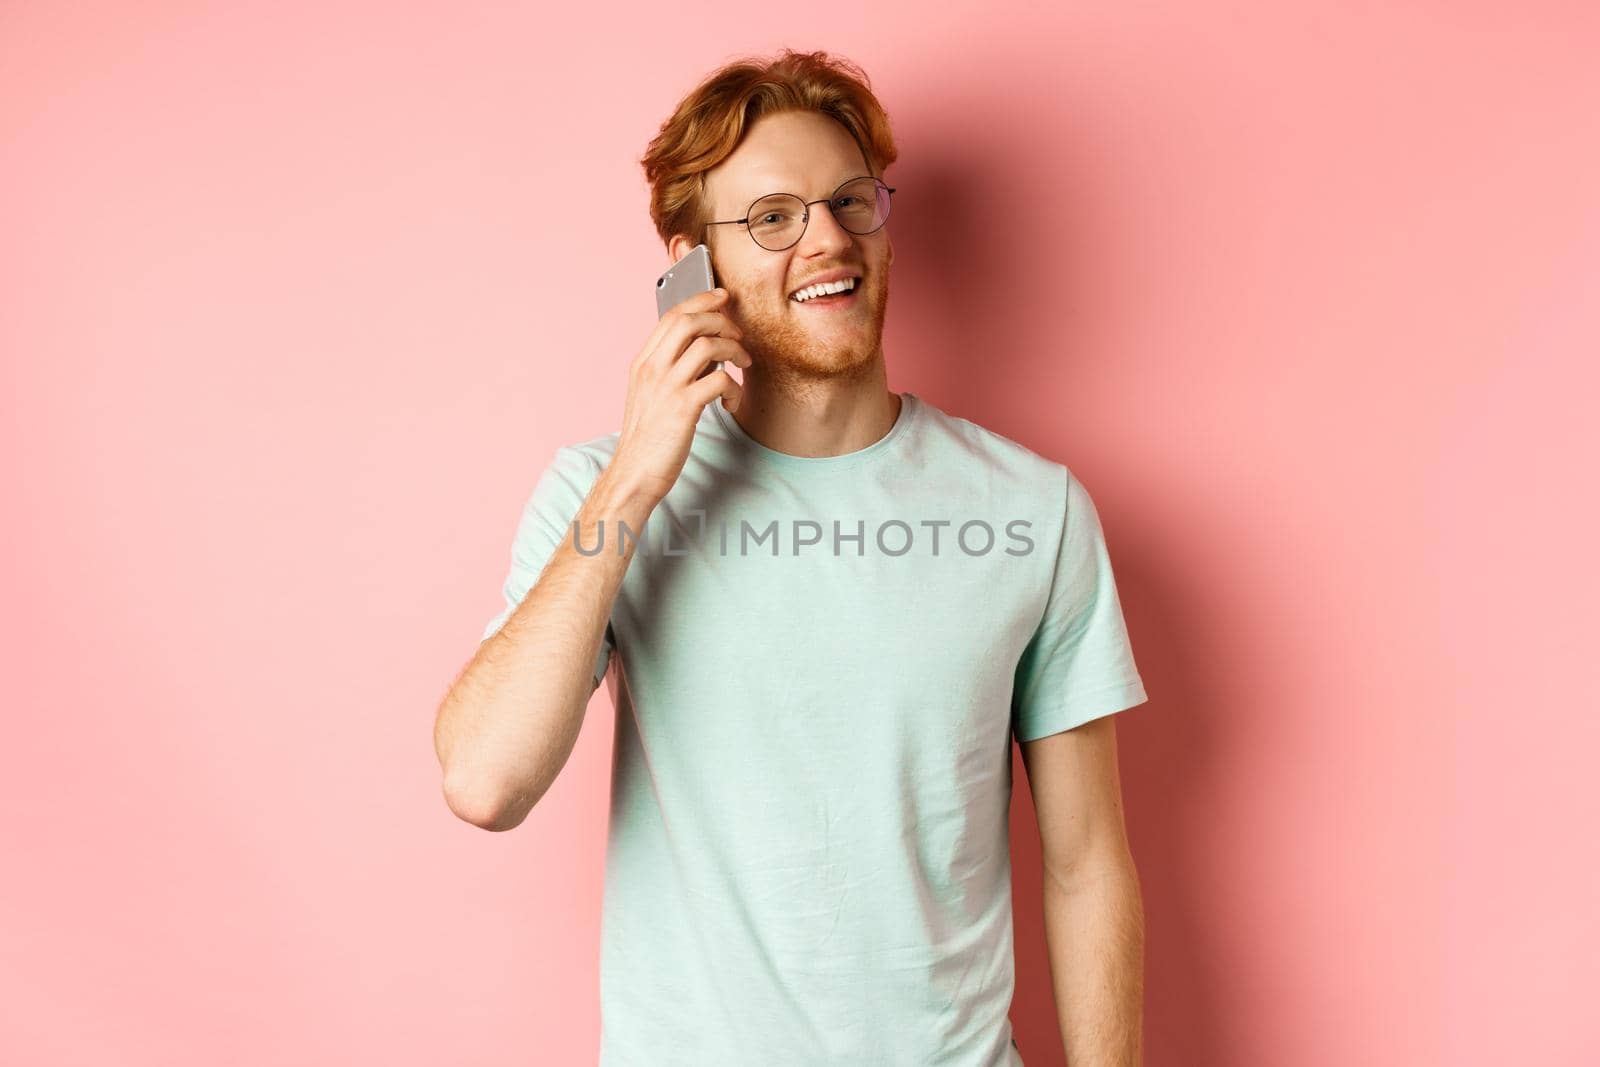 Handsomy hipster guy with red hair and beard talking on mobile phone, calling someone and looking happy, standing over pink background.